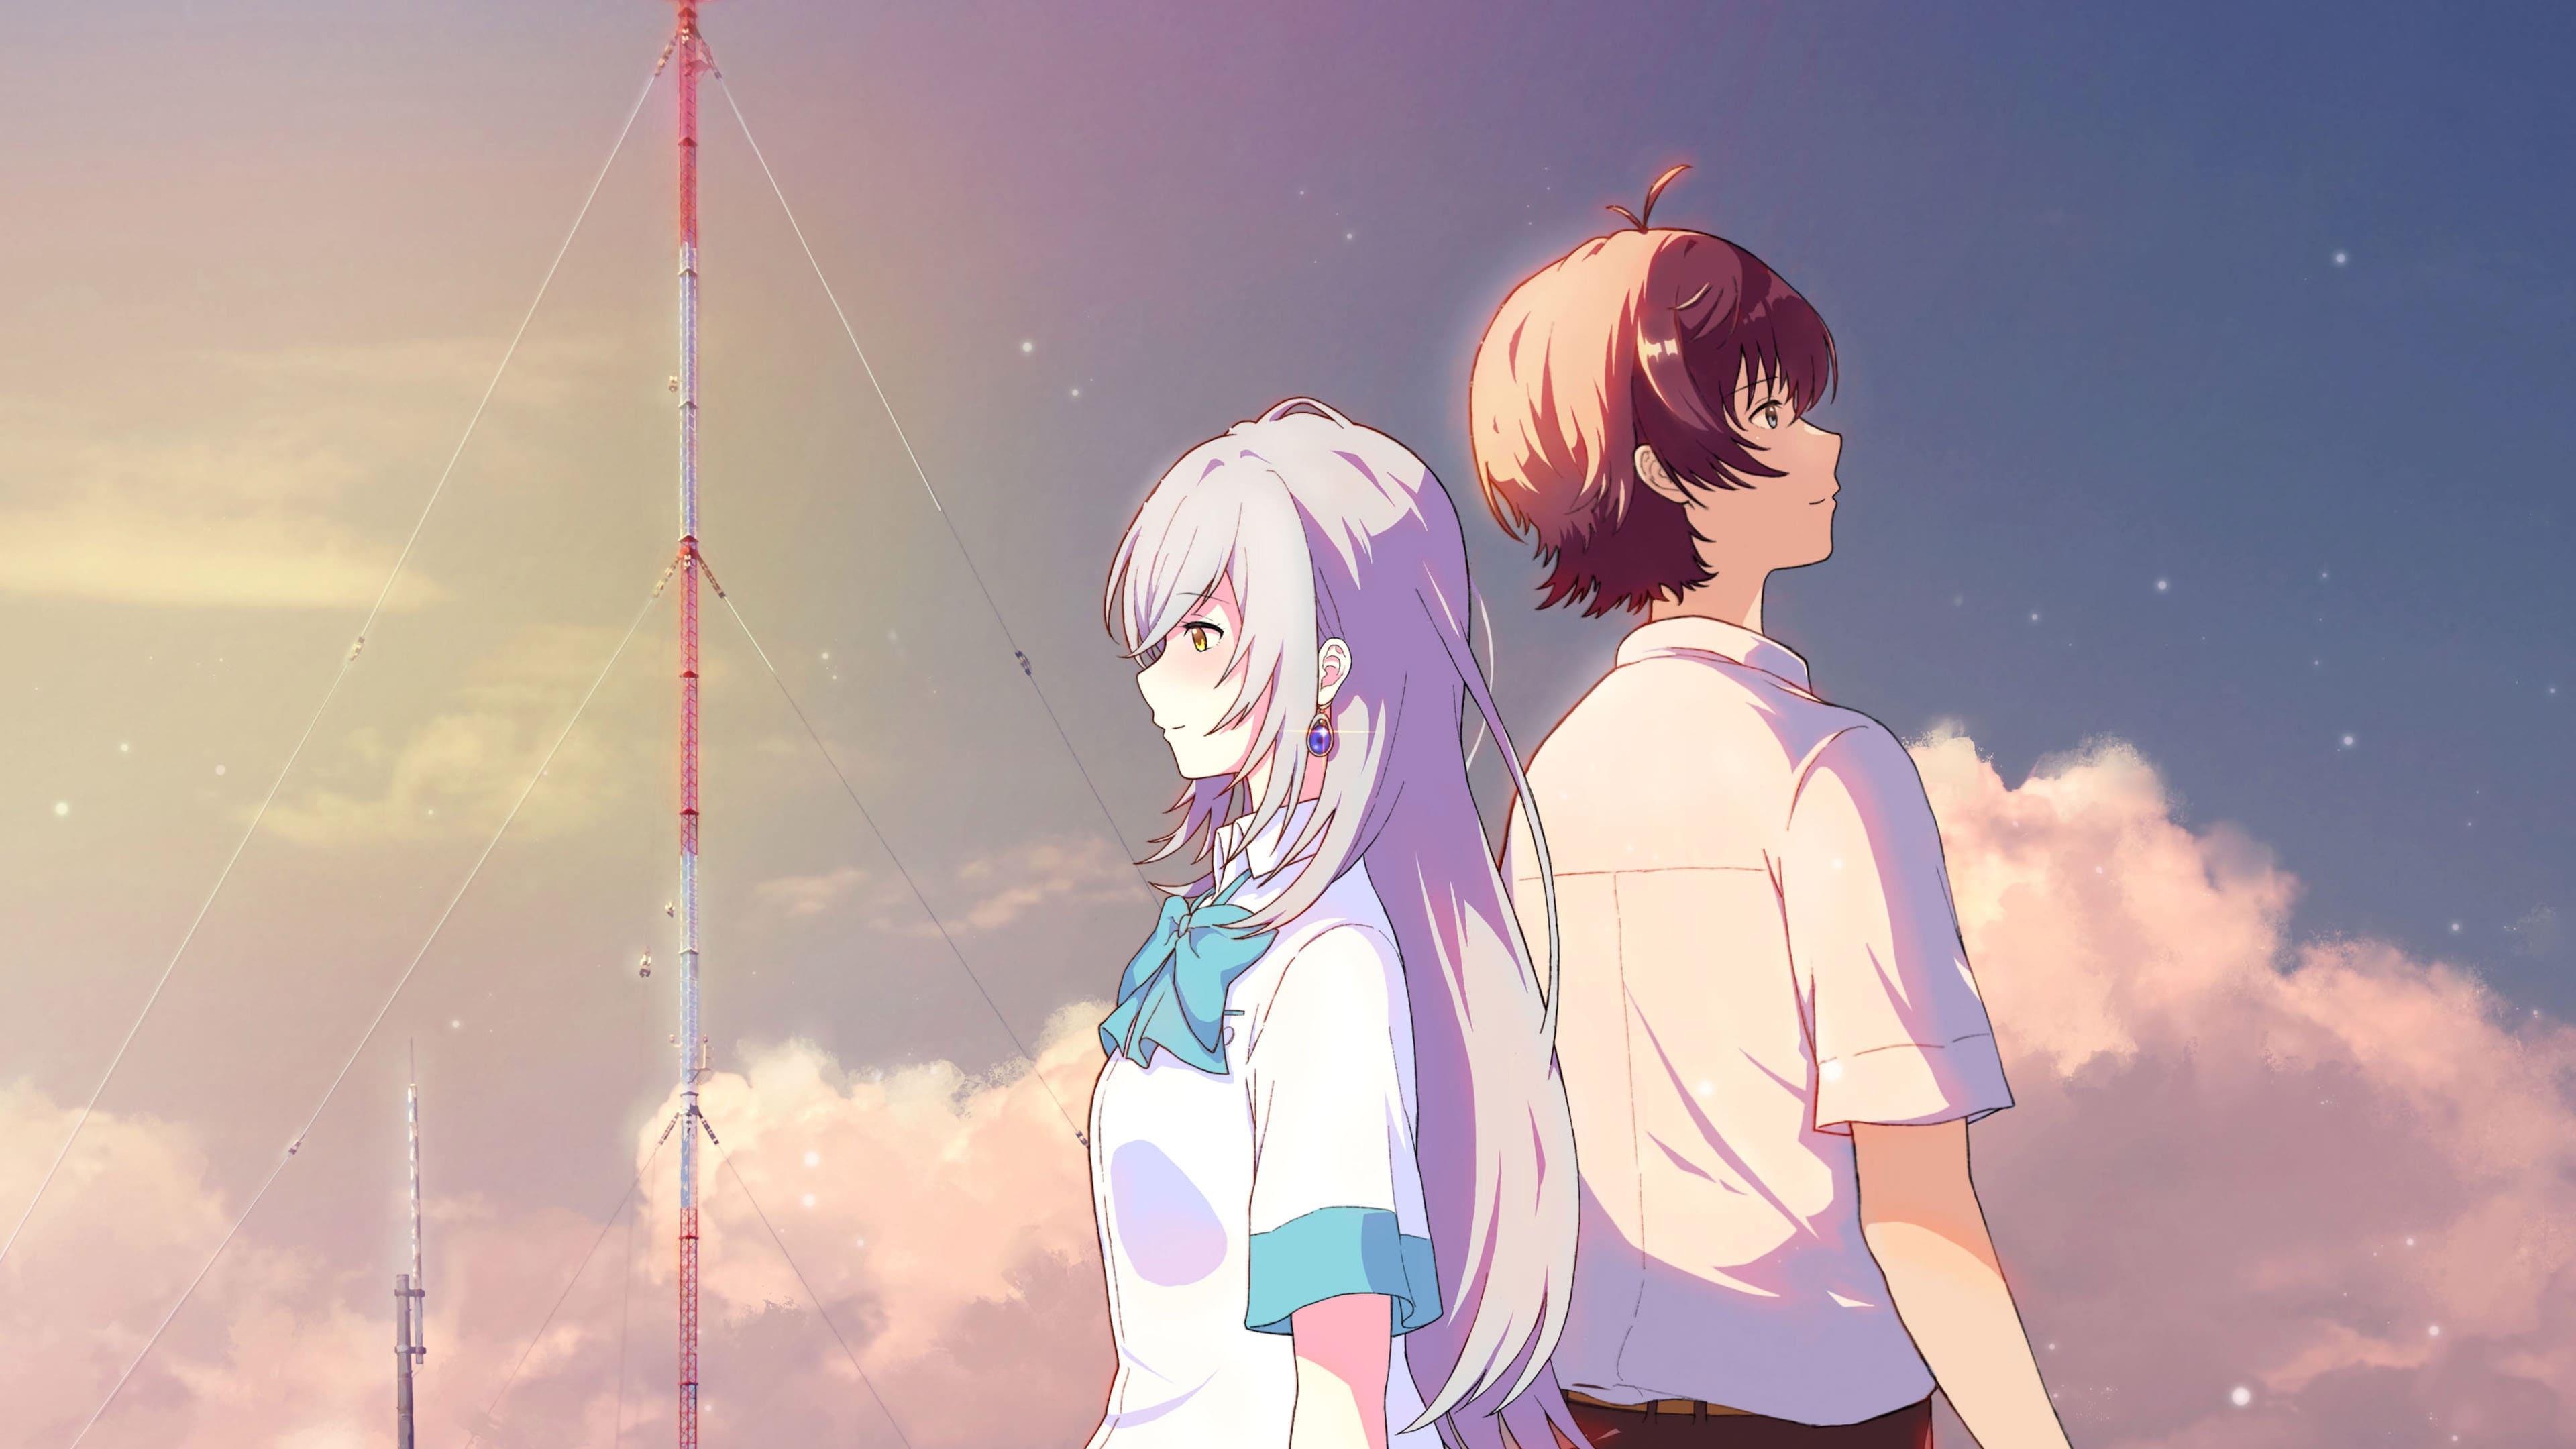 IRODUKU: The World in Colors backdrop